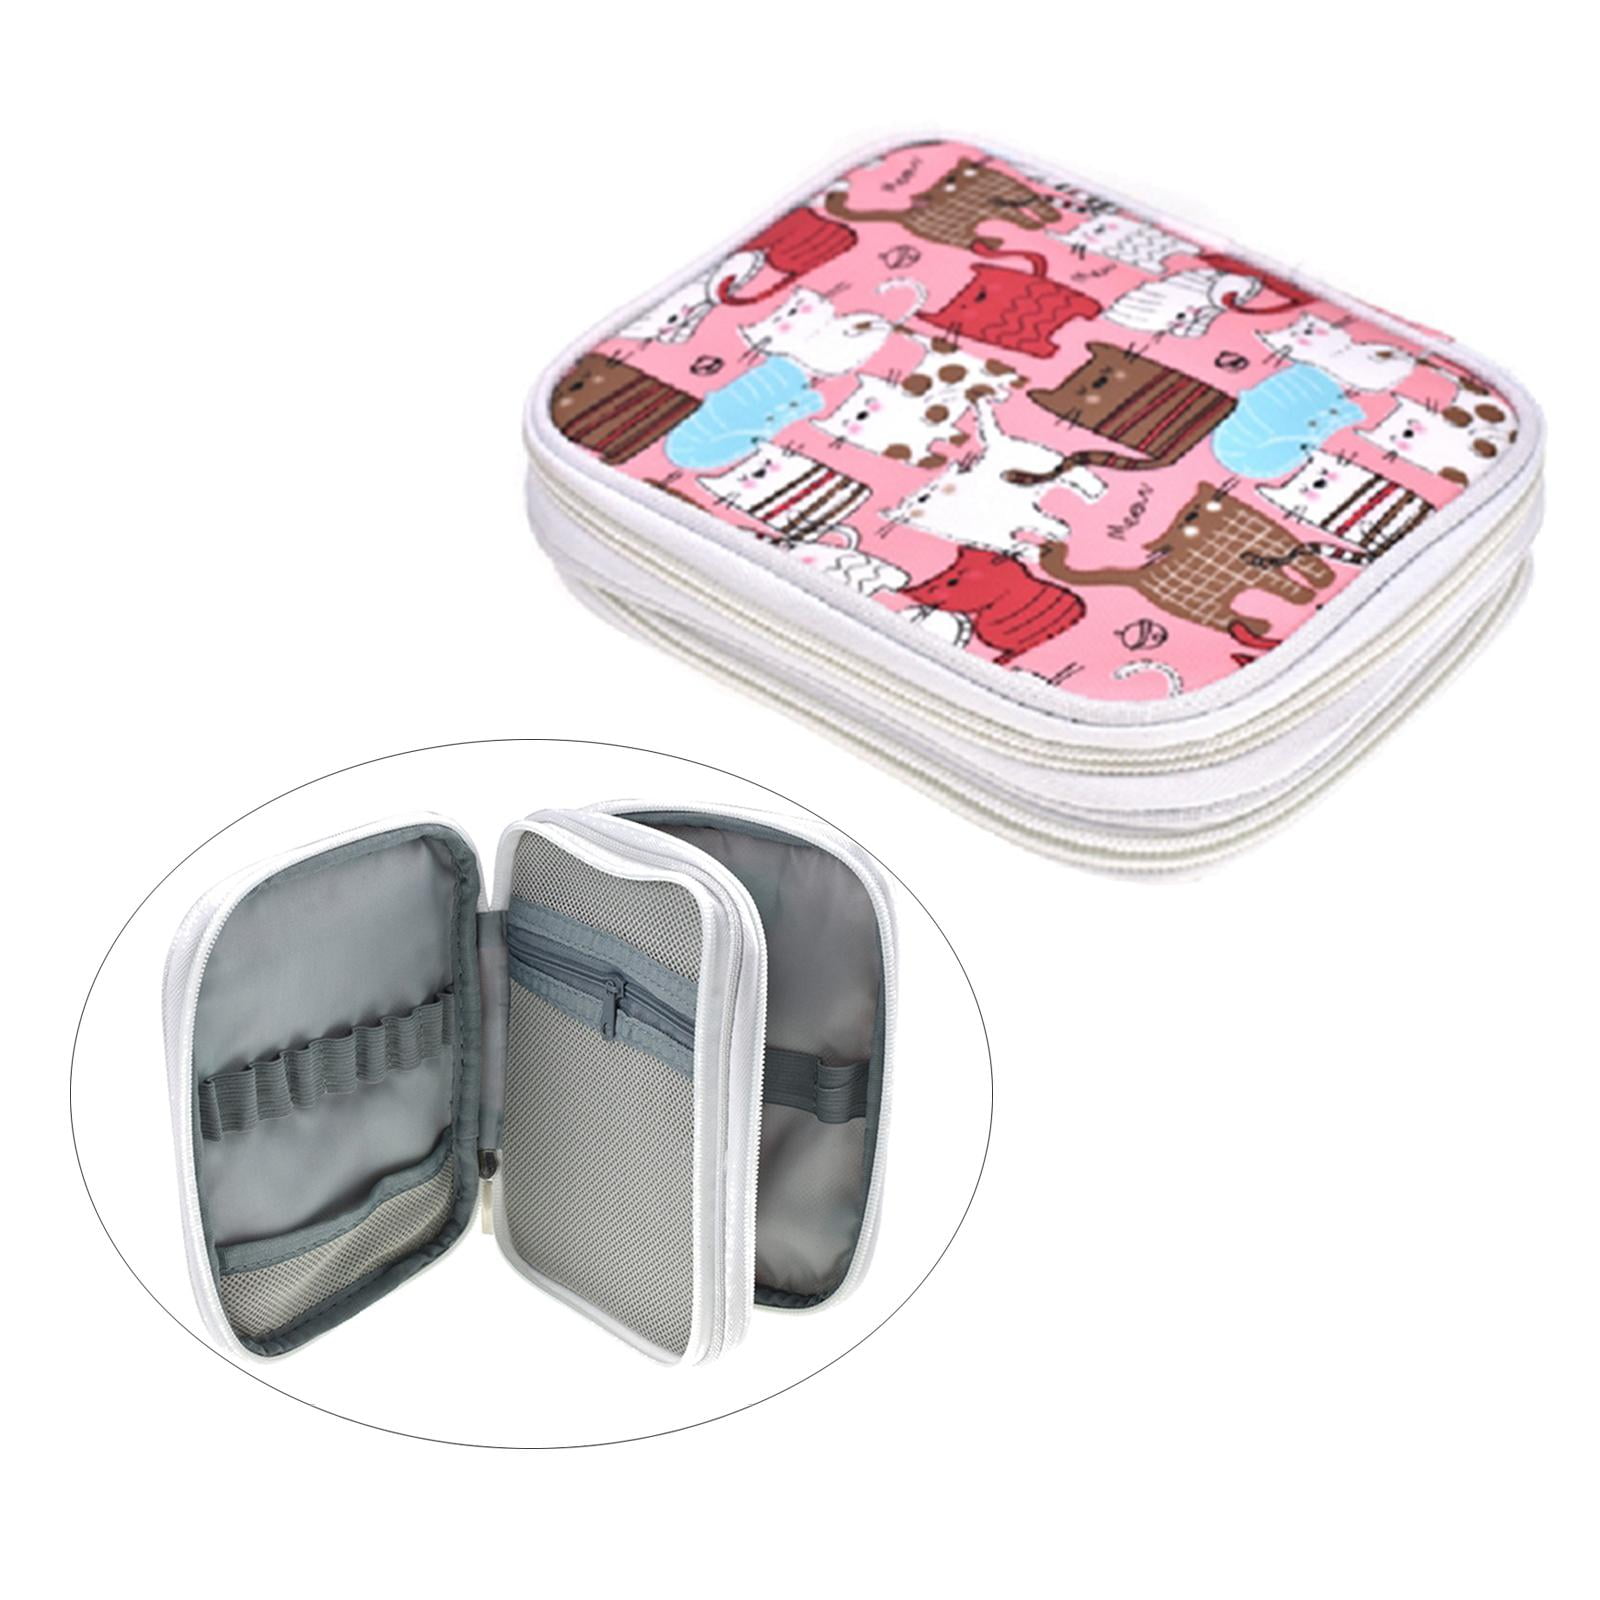 Organizer Case for Knitting Crochet Hook, Keep it in Place and Easy to  Carry, with Web & Crochet Holder Slots - Colorful Cat (No Accessories  Included) 